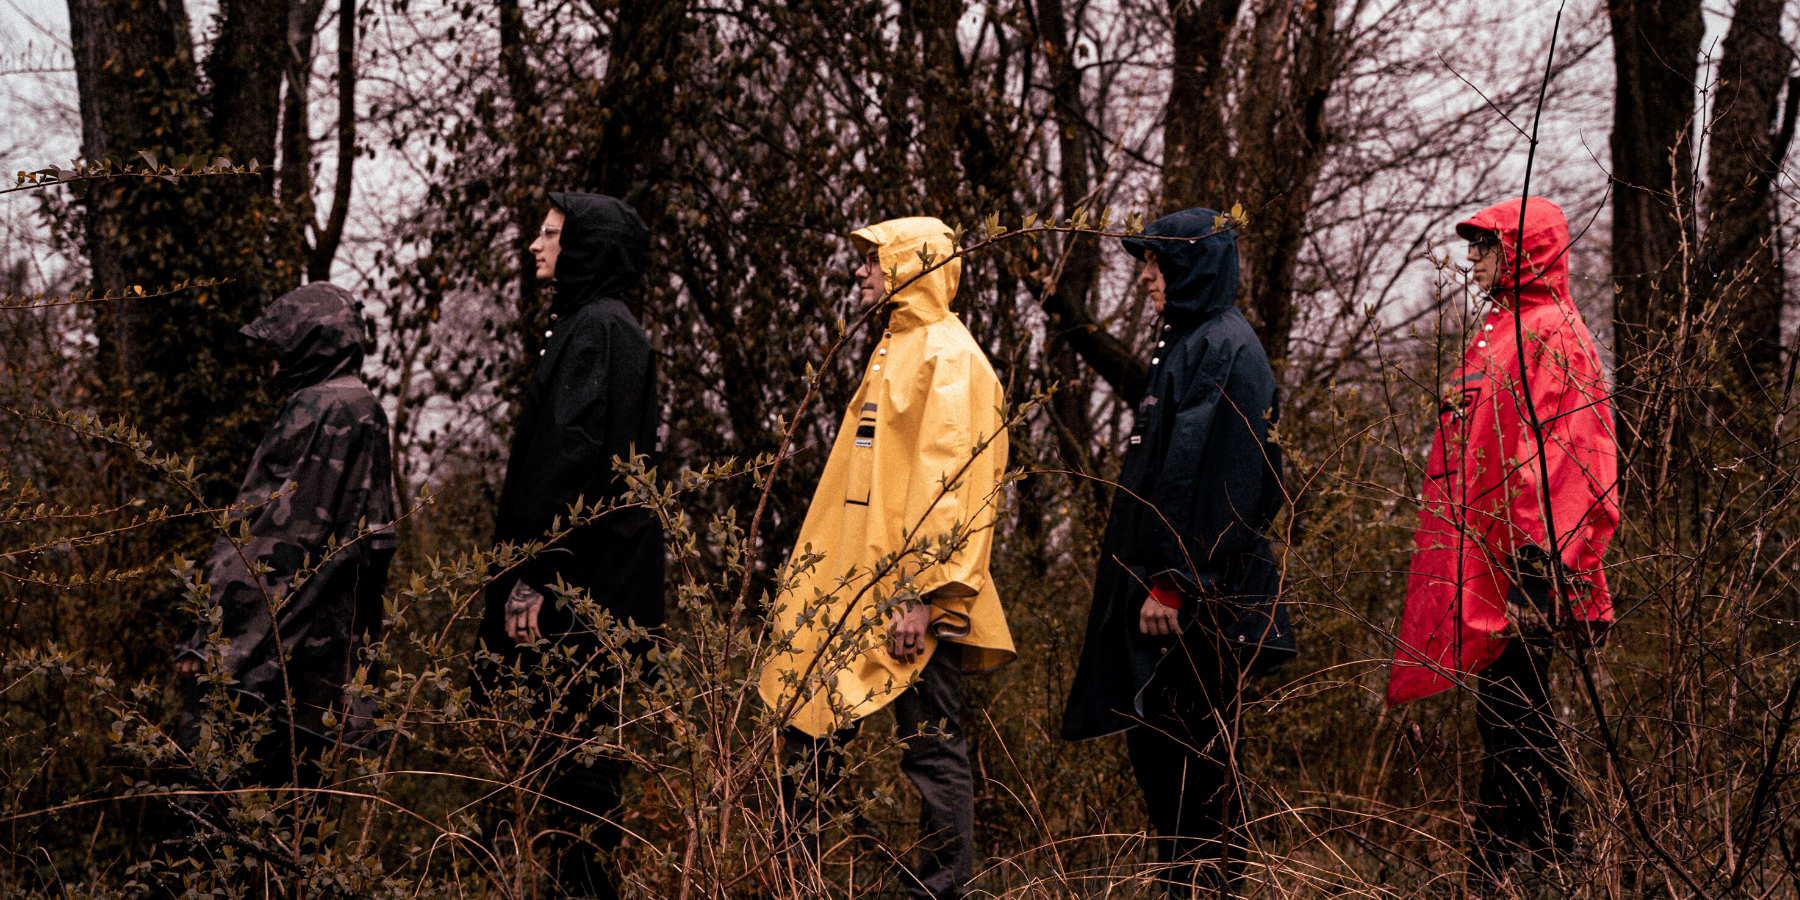 Group of people wearing the people's poncho rainwear in all colours including: red, black, navy, yellow and camo